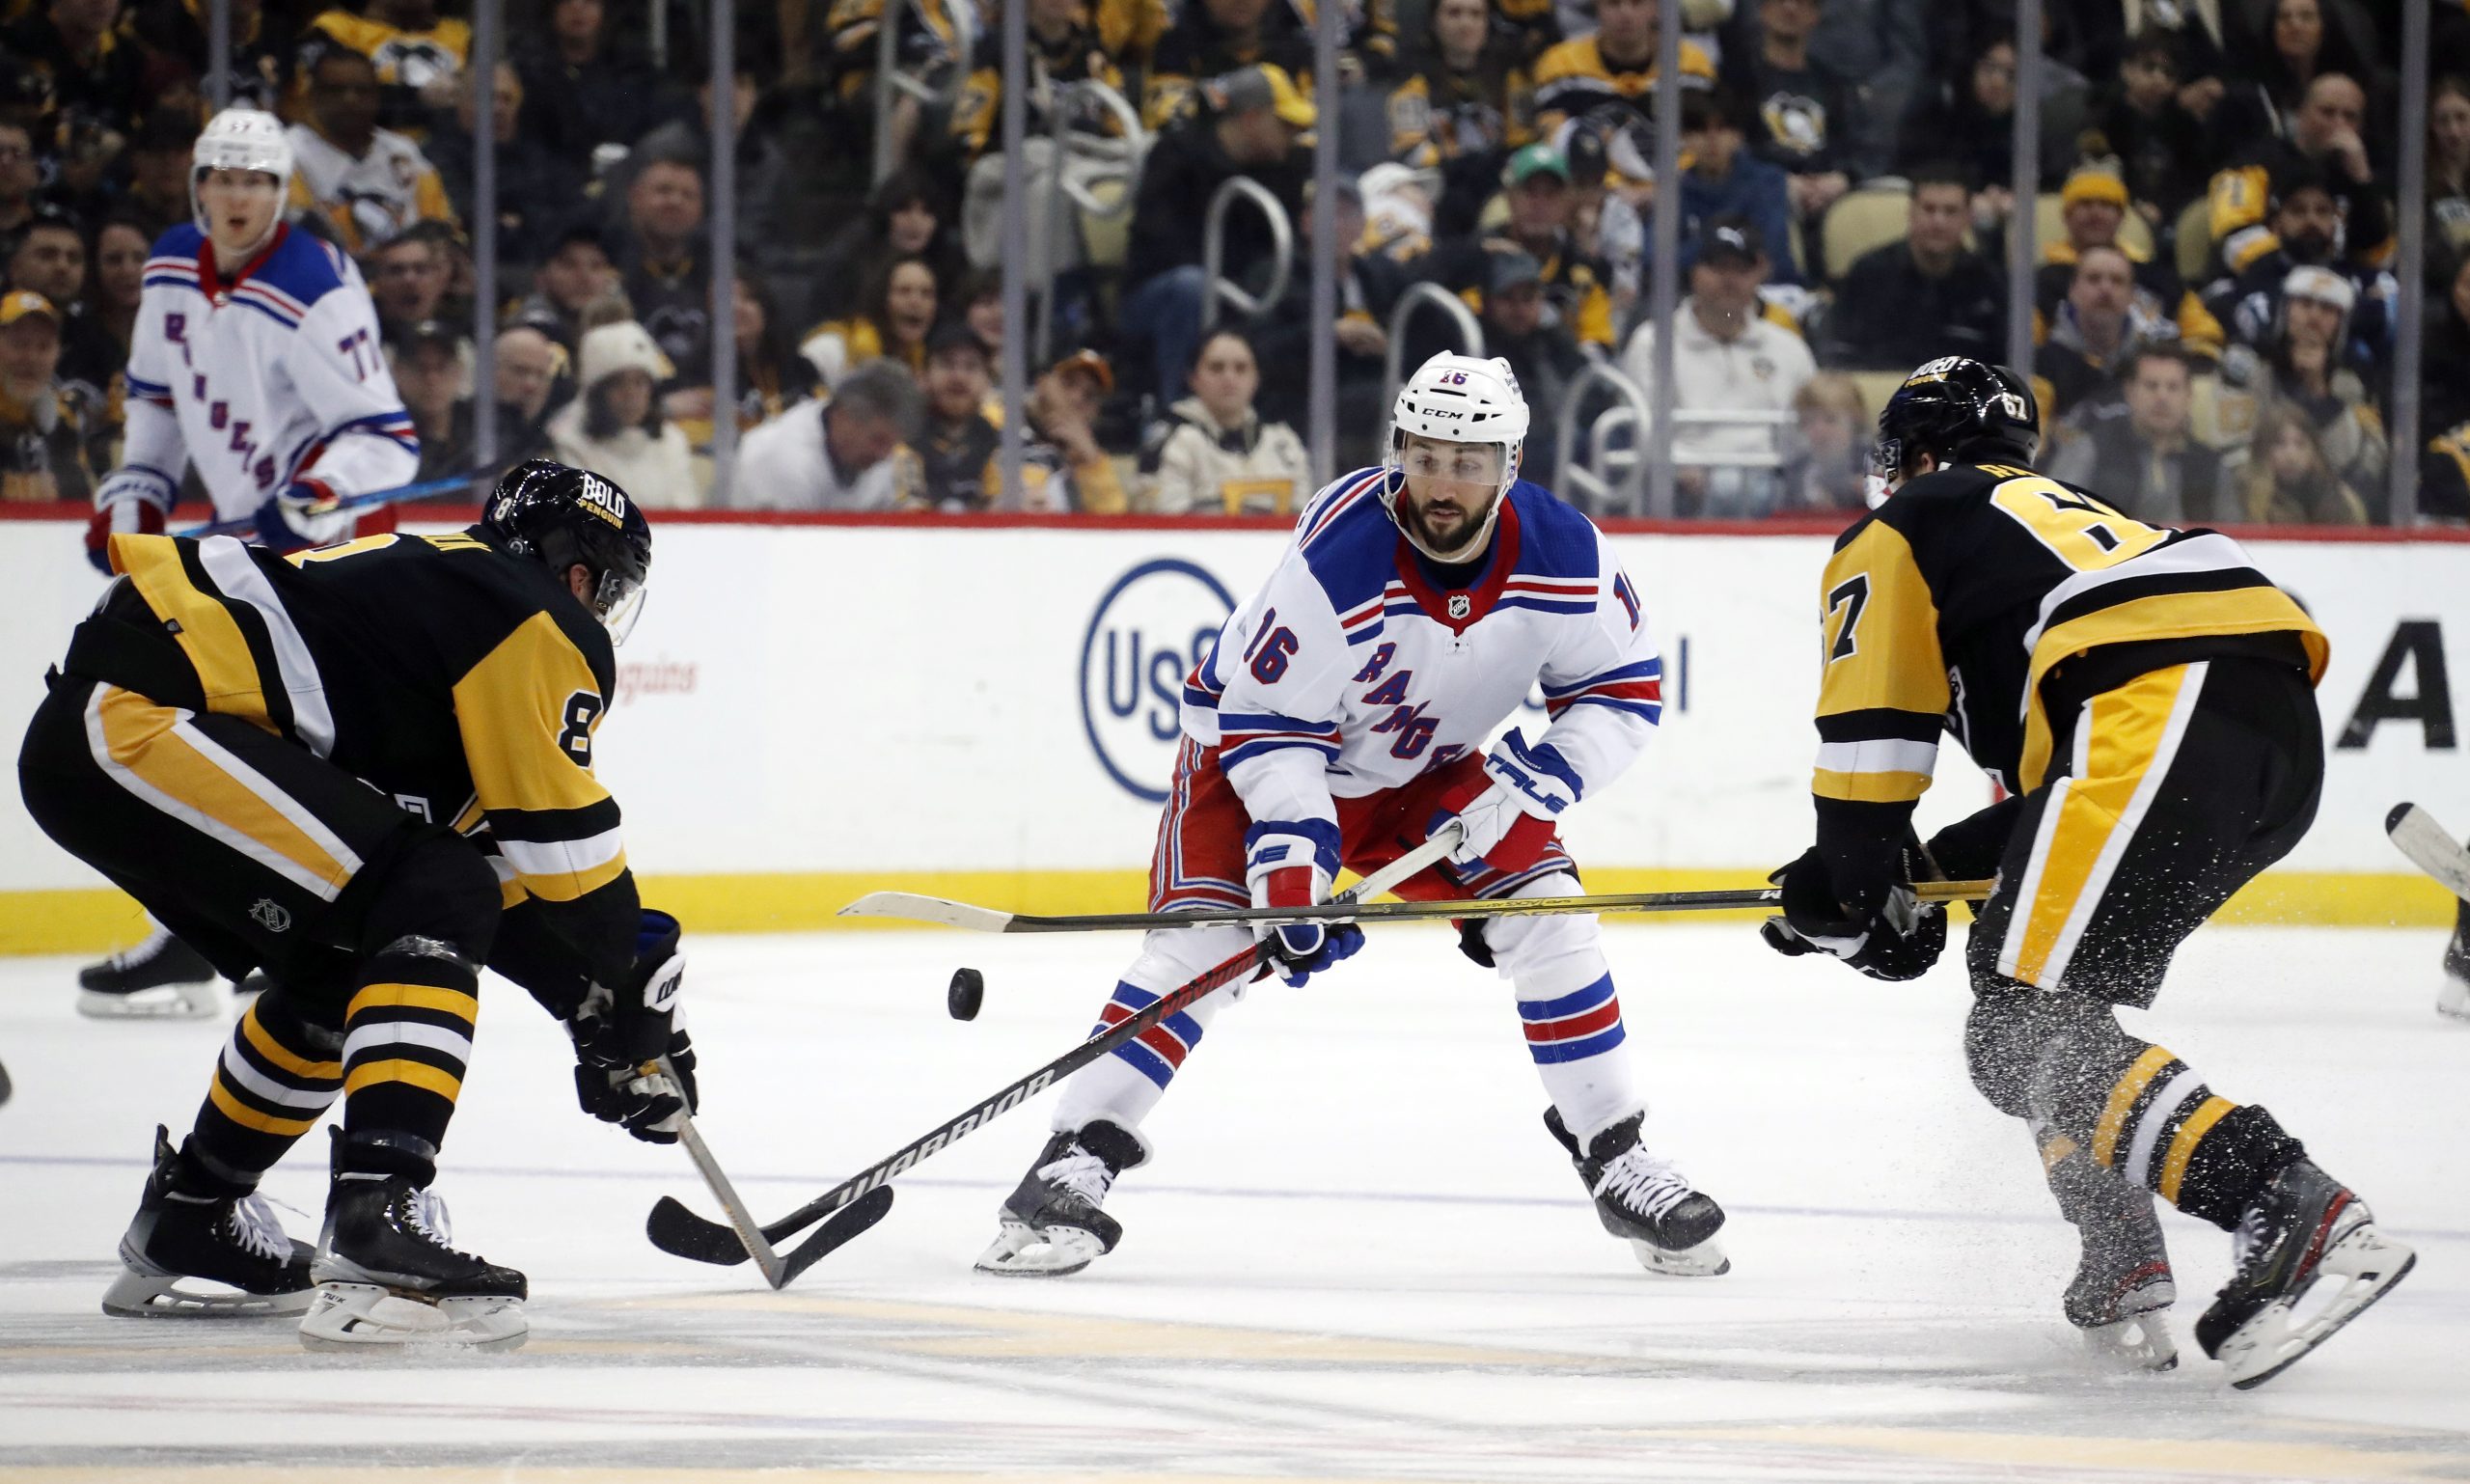 NHL Predictions March 16th With Boston Bruins vs Pittsburgh Penguins